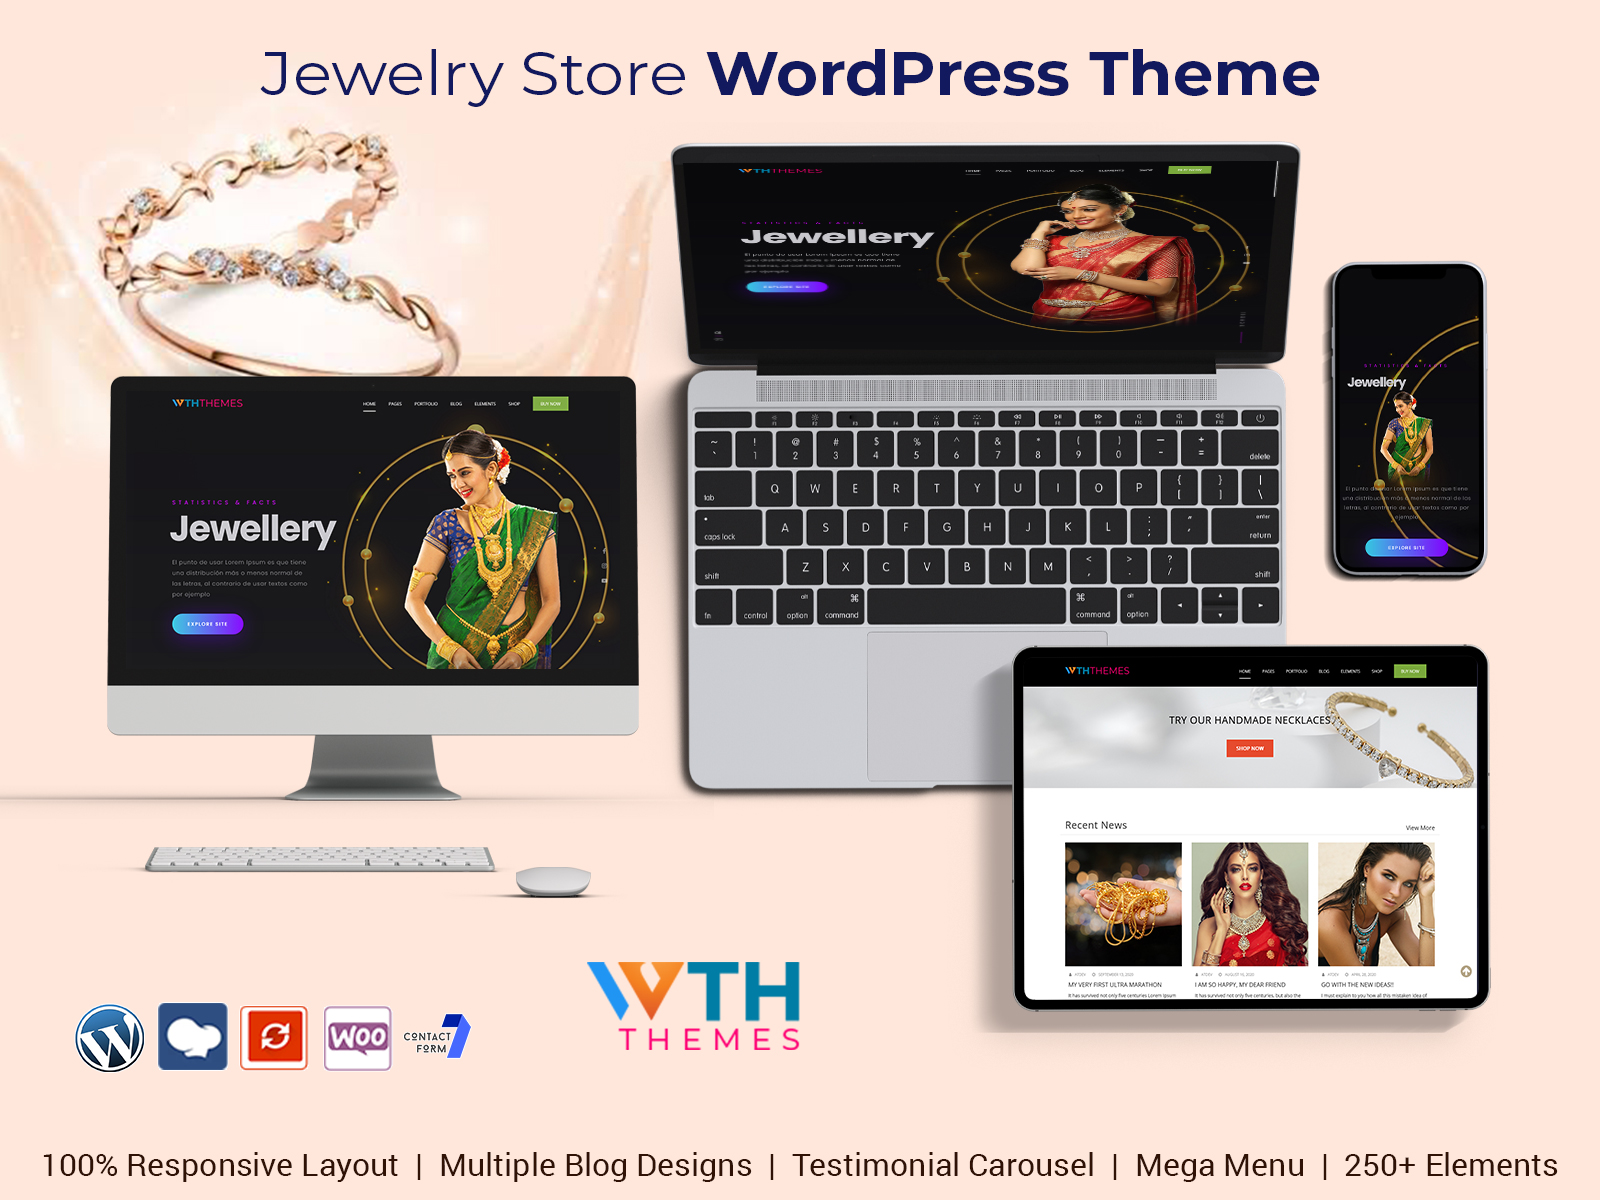 Jewelry WordPress Theme Website With Simple And Cool Features